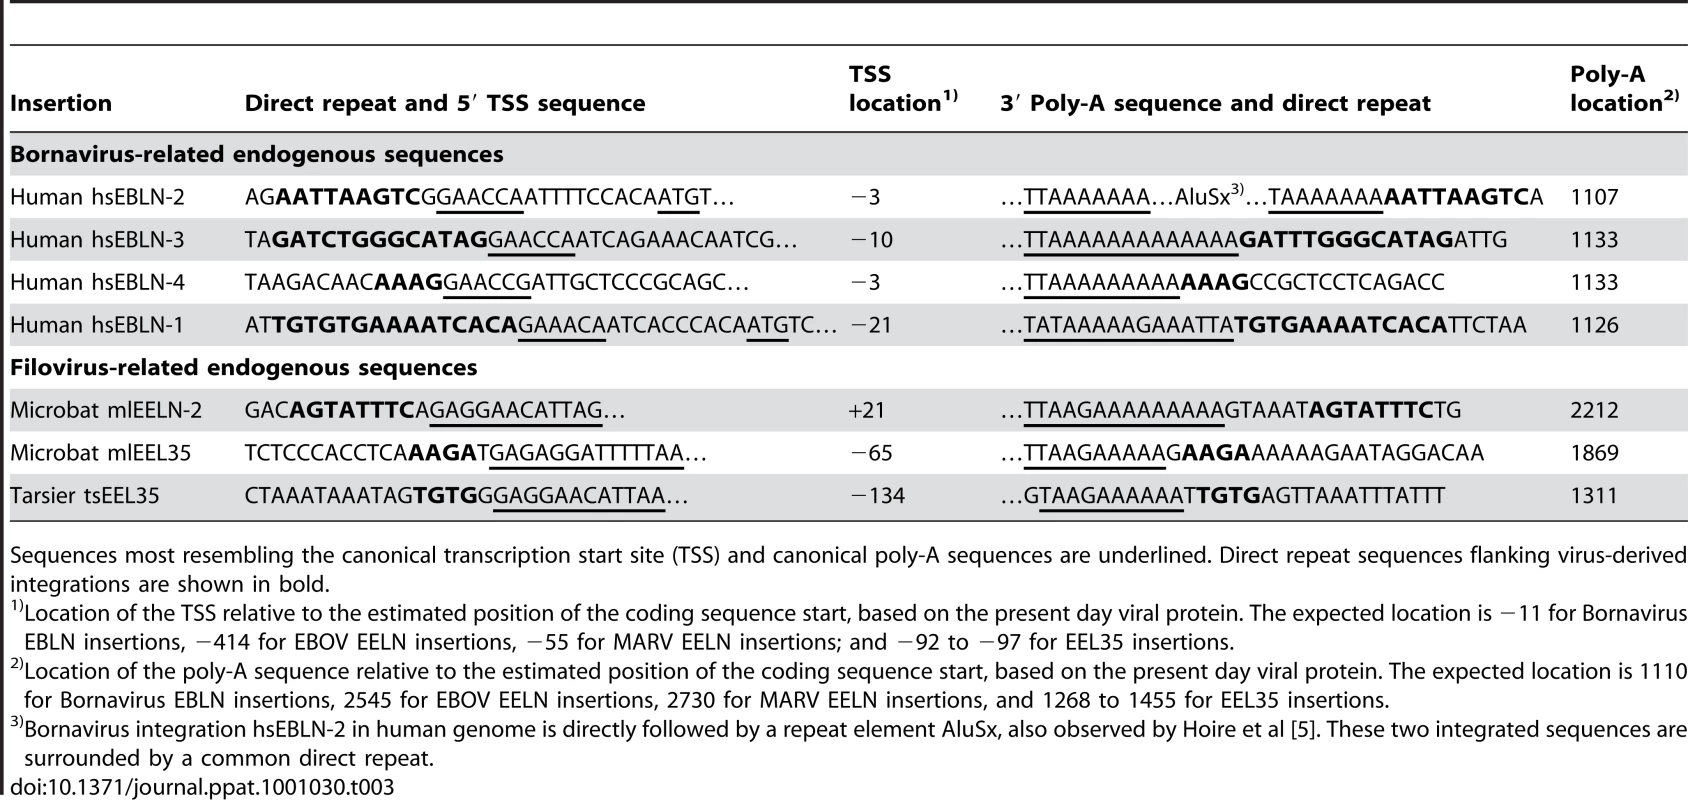 Presence of direct repeats, viral transcription start sites, and poly-A sequences in some virus-related genomic integrations.